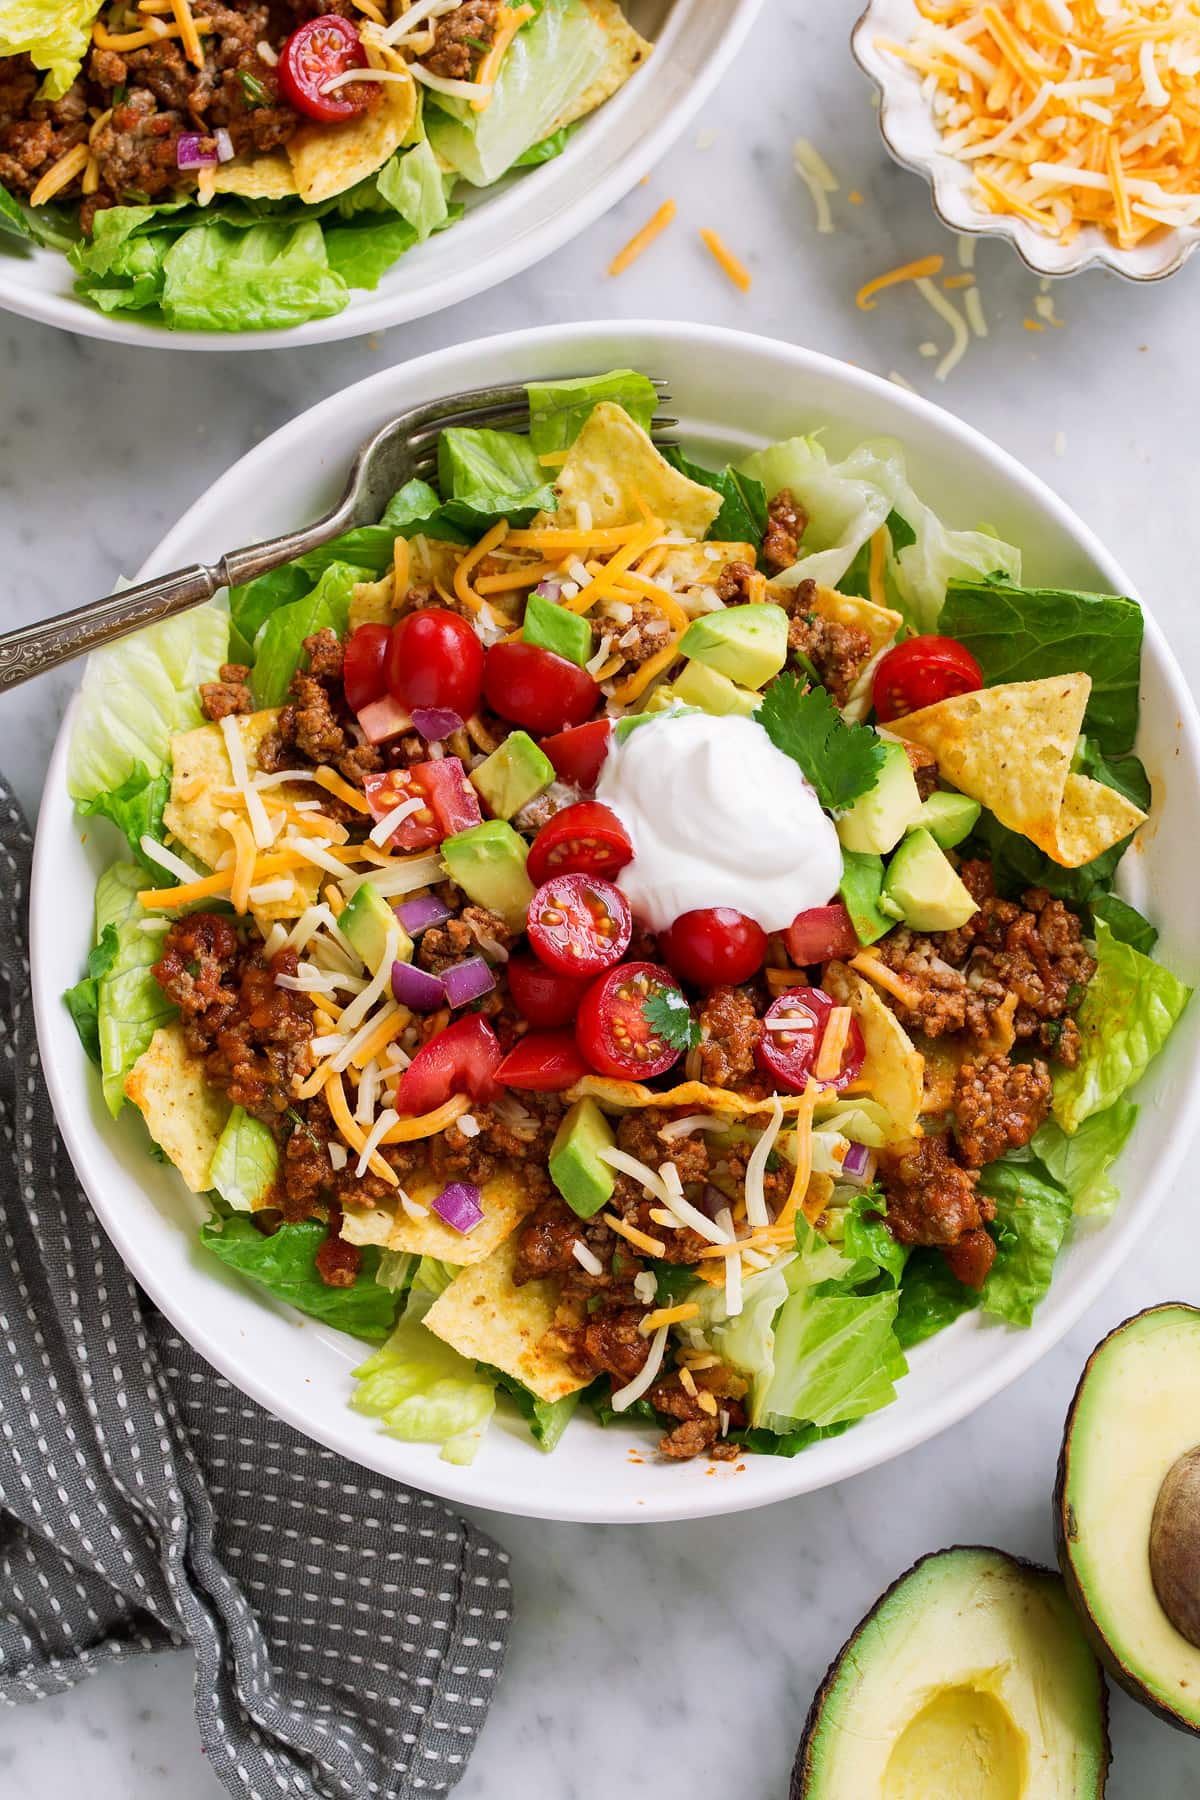 Taco Salad Recipe (Quick and Easy!) - Cooking Classy